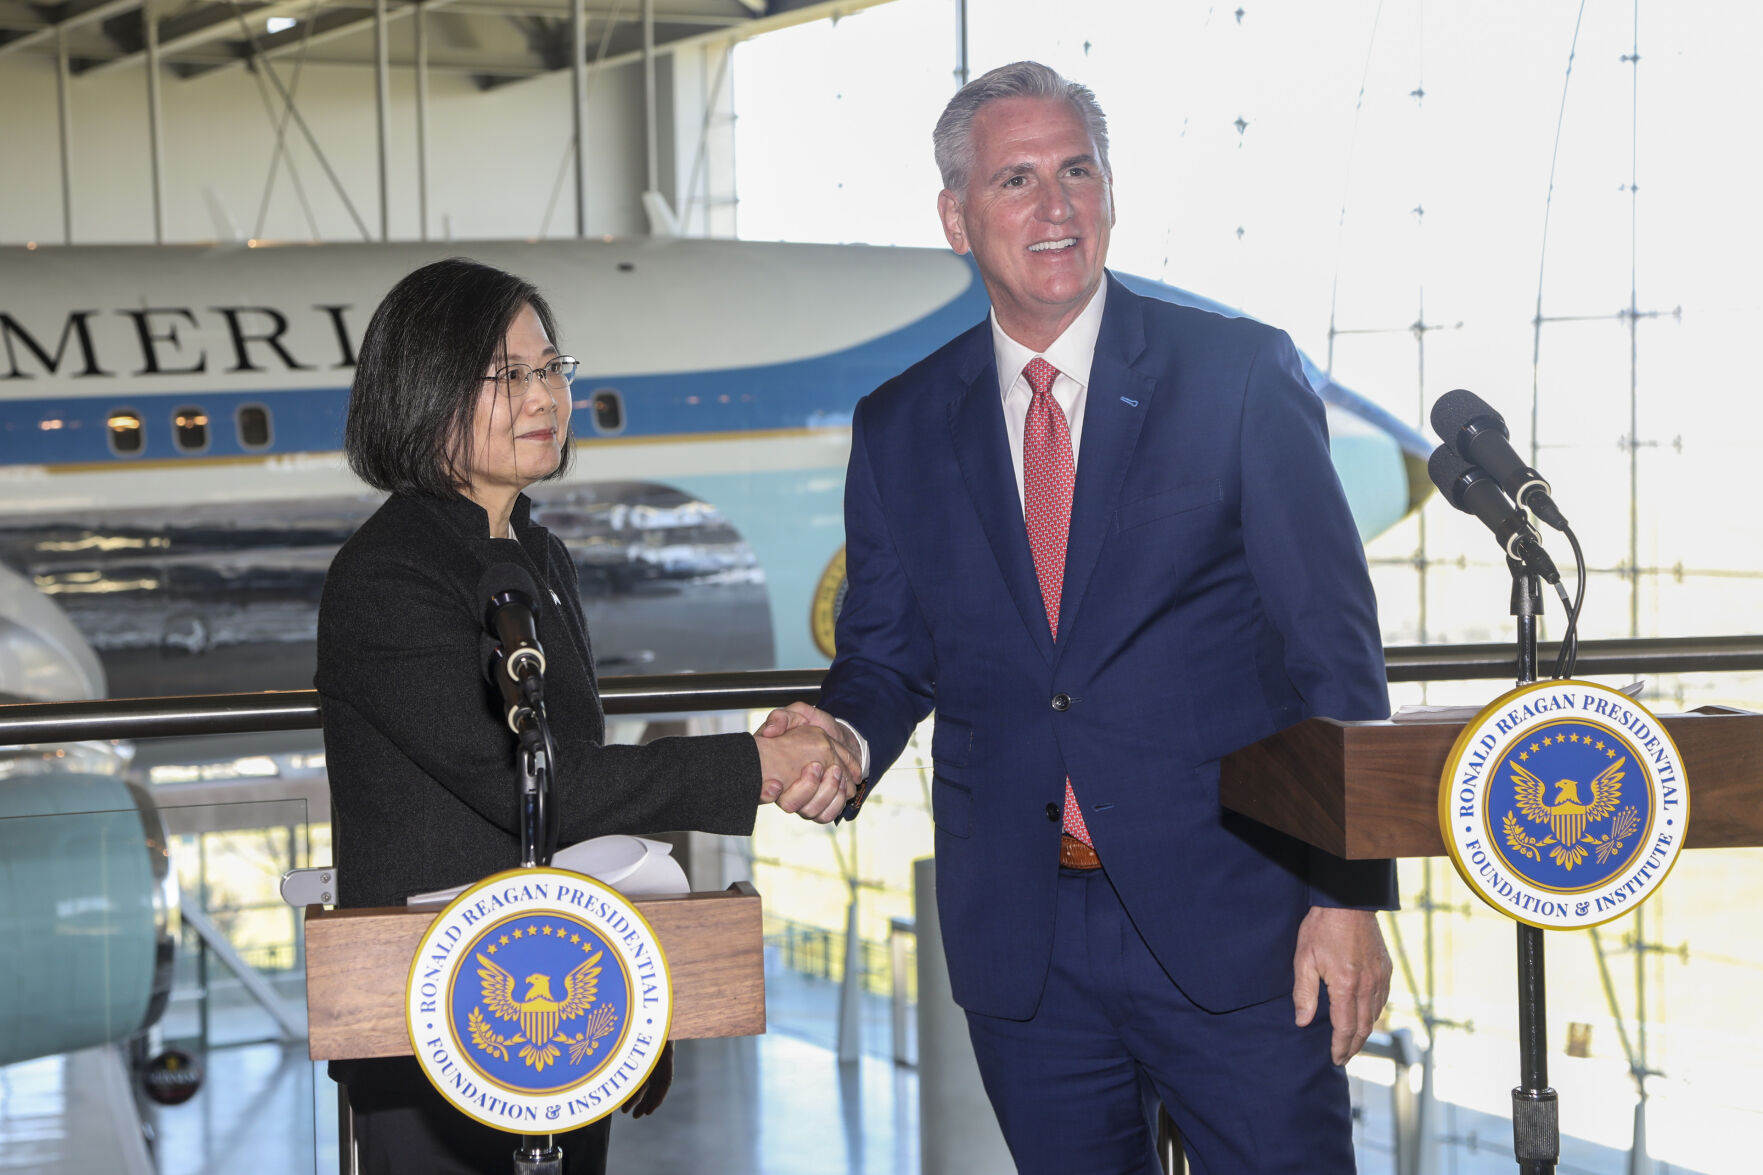 <p>House Speaker Kevin McCarthy, R-Calif., right, shakes hands with Taiwanese President Tsai Ing-wen after delivering statements to the press after a Bipartisan Leadership Meeting at the Ronald Reagan Presidential Library in Simi Valley, Calif., Wednesday, April 5, 2023. (AP Photo/Ringo H.W. Chiu)</p>   PHOTO CREDIT: Ringo H.W. Chiu 